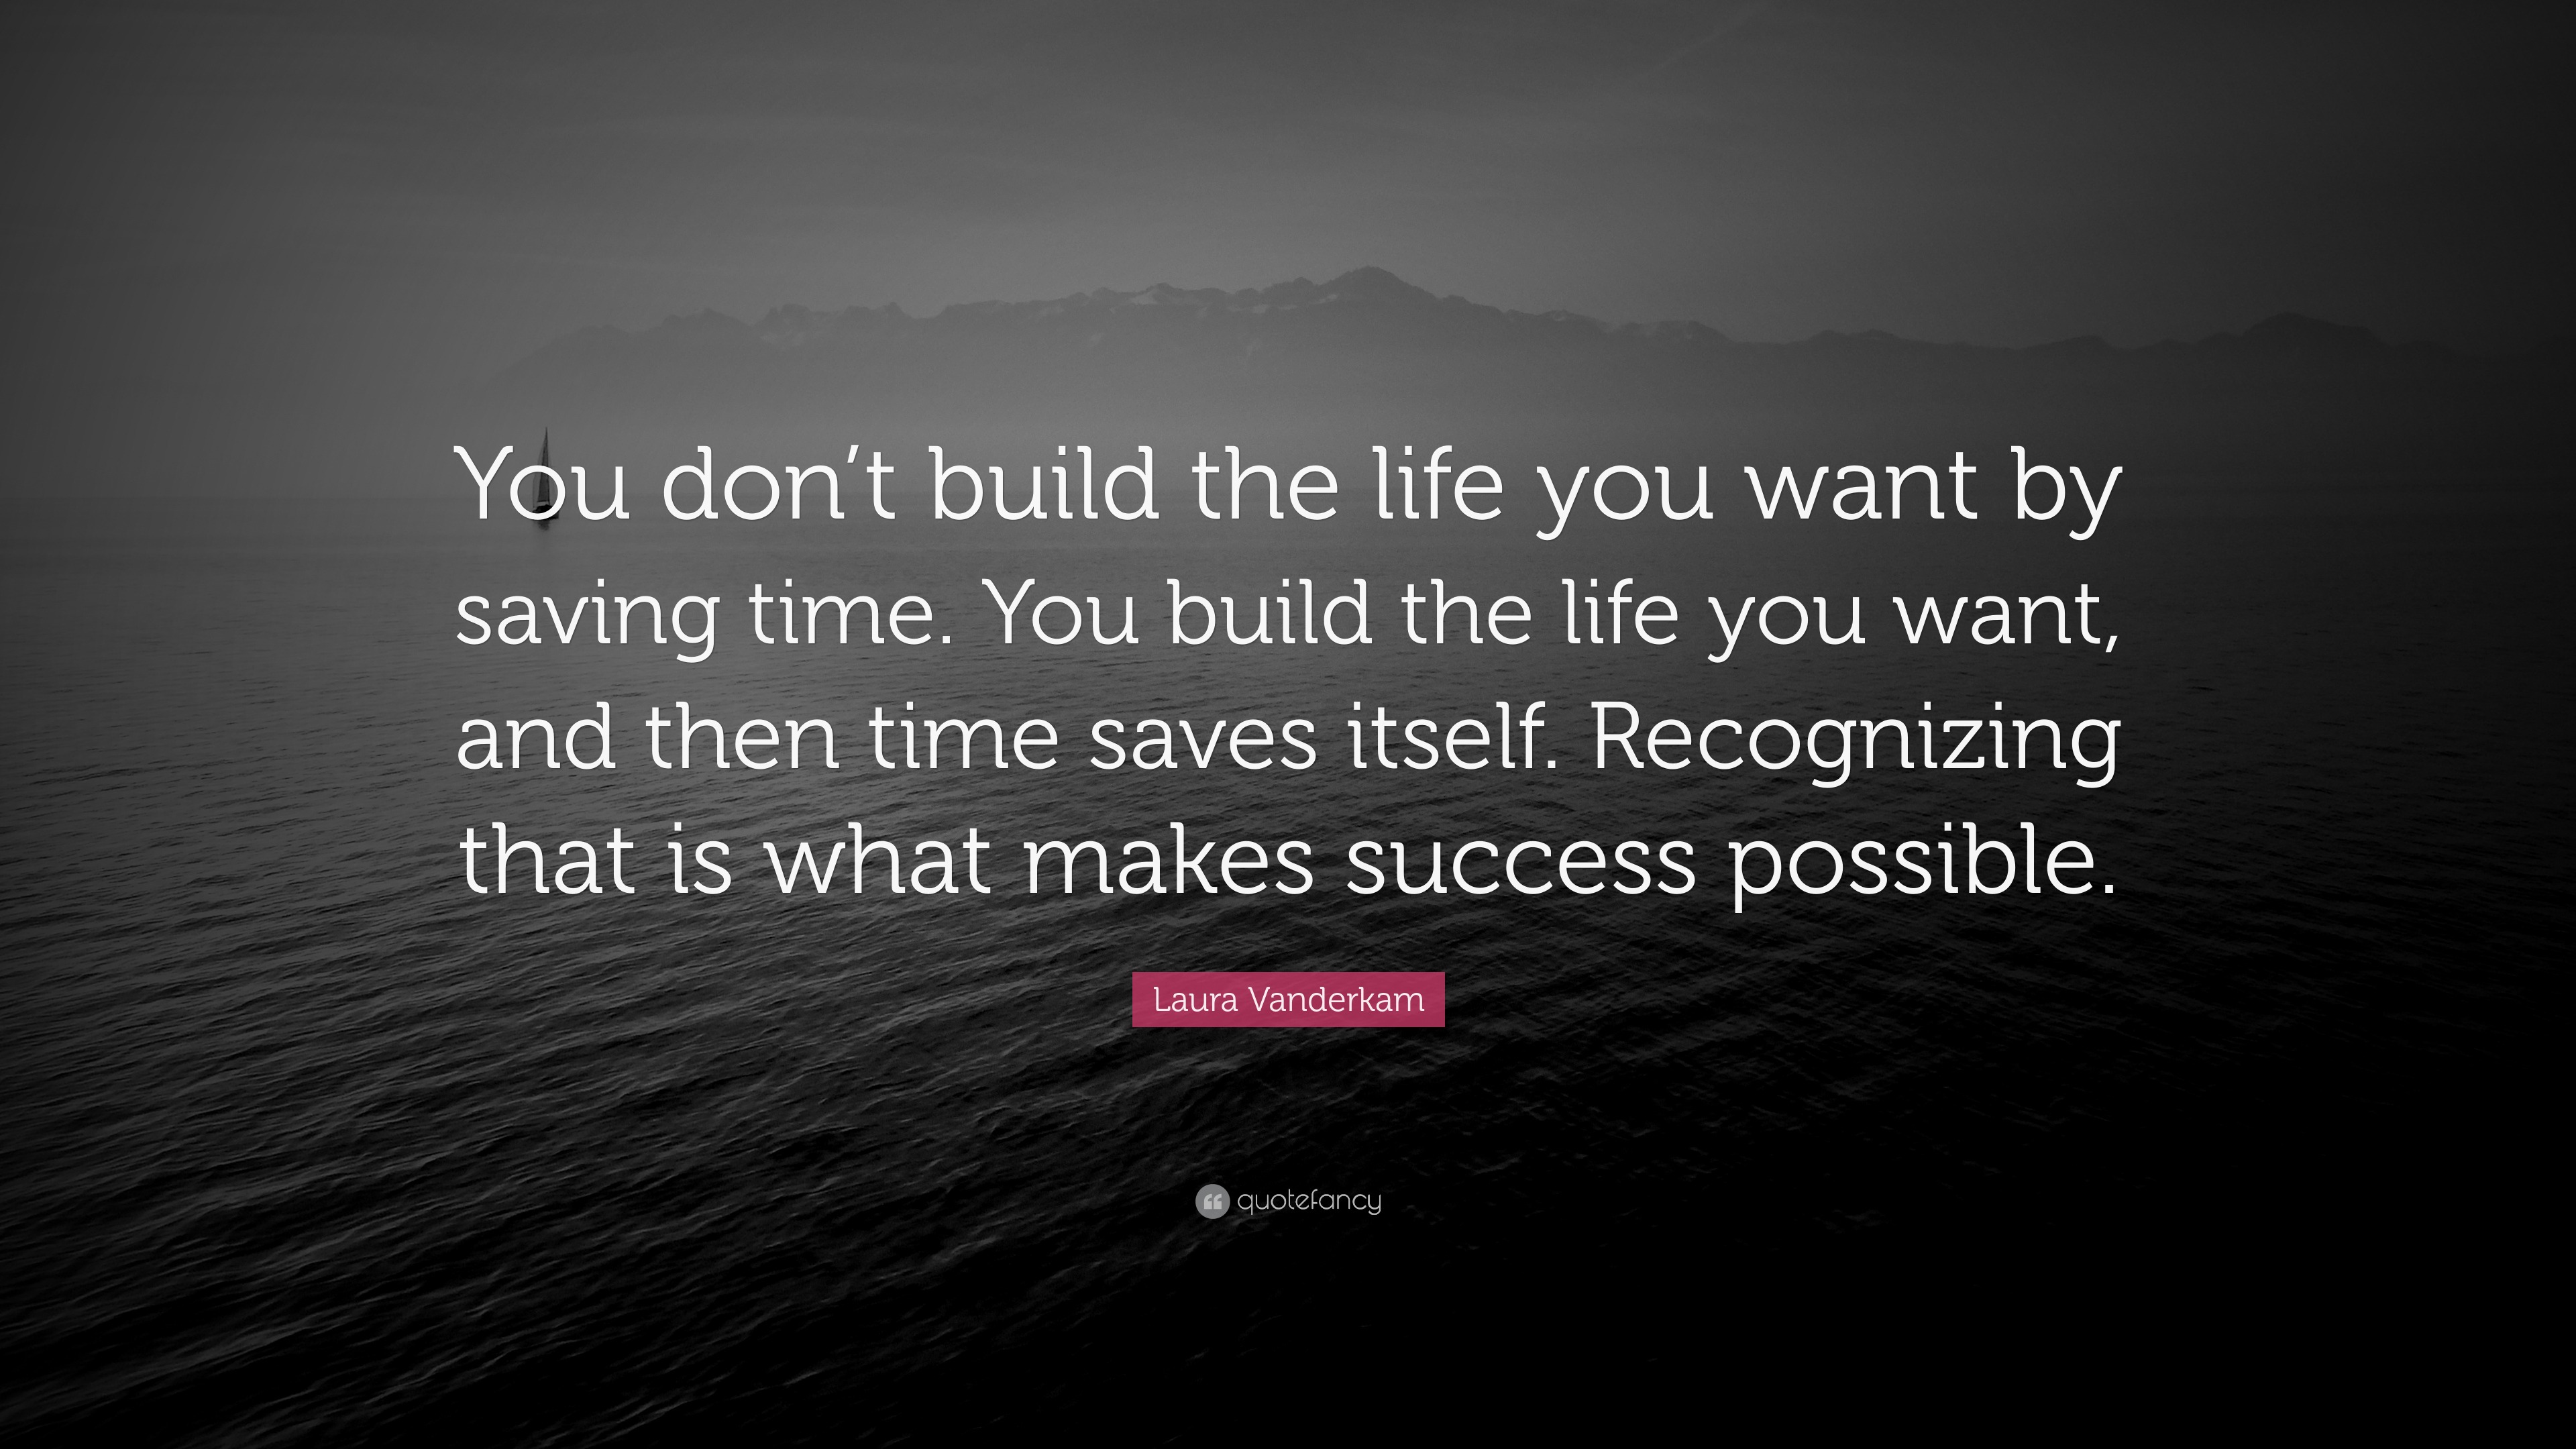 Laura Vanderkam Quote: “You don’t build the life you want by saving ...